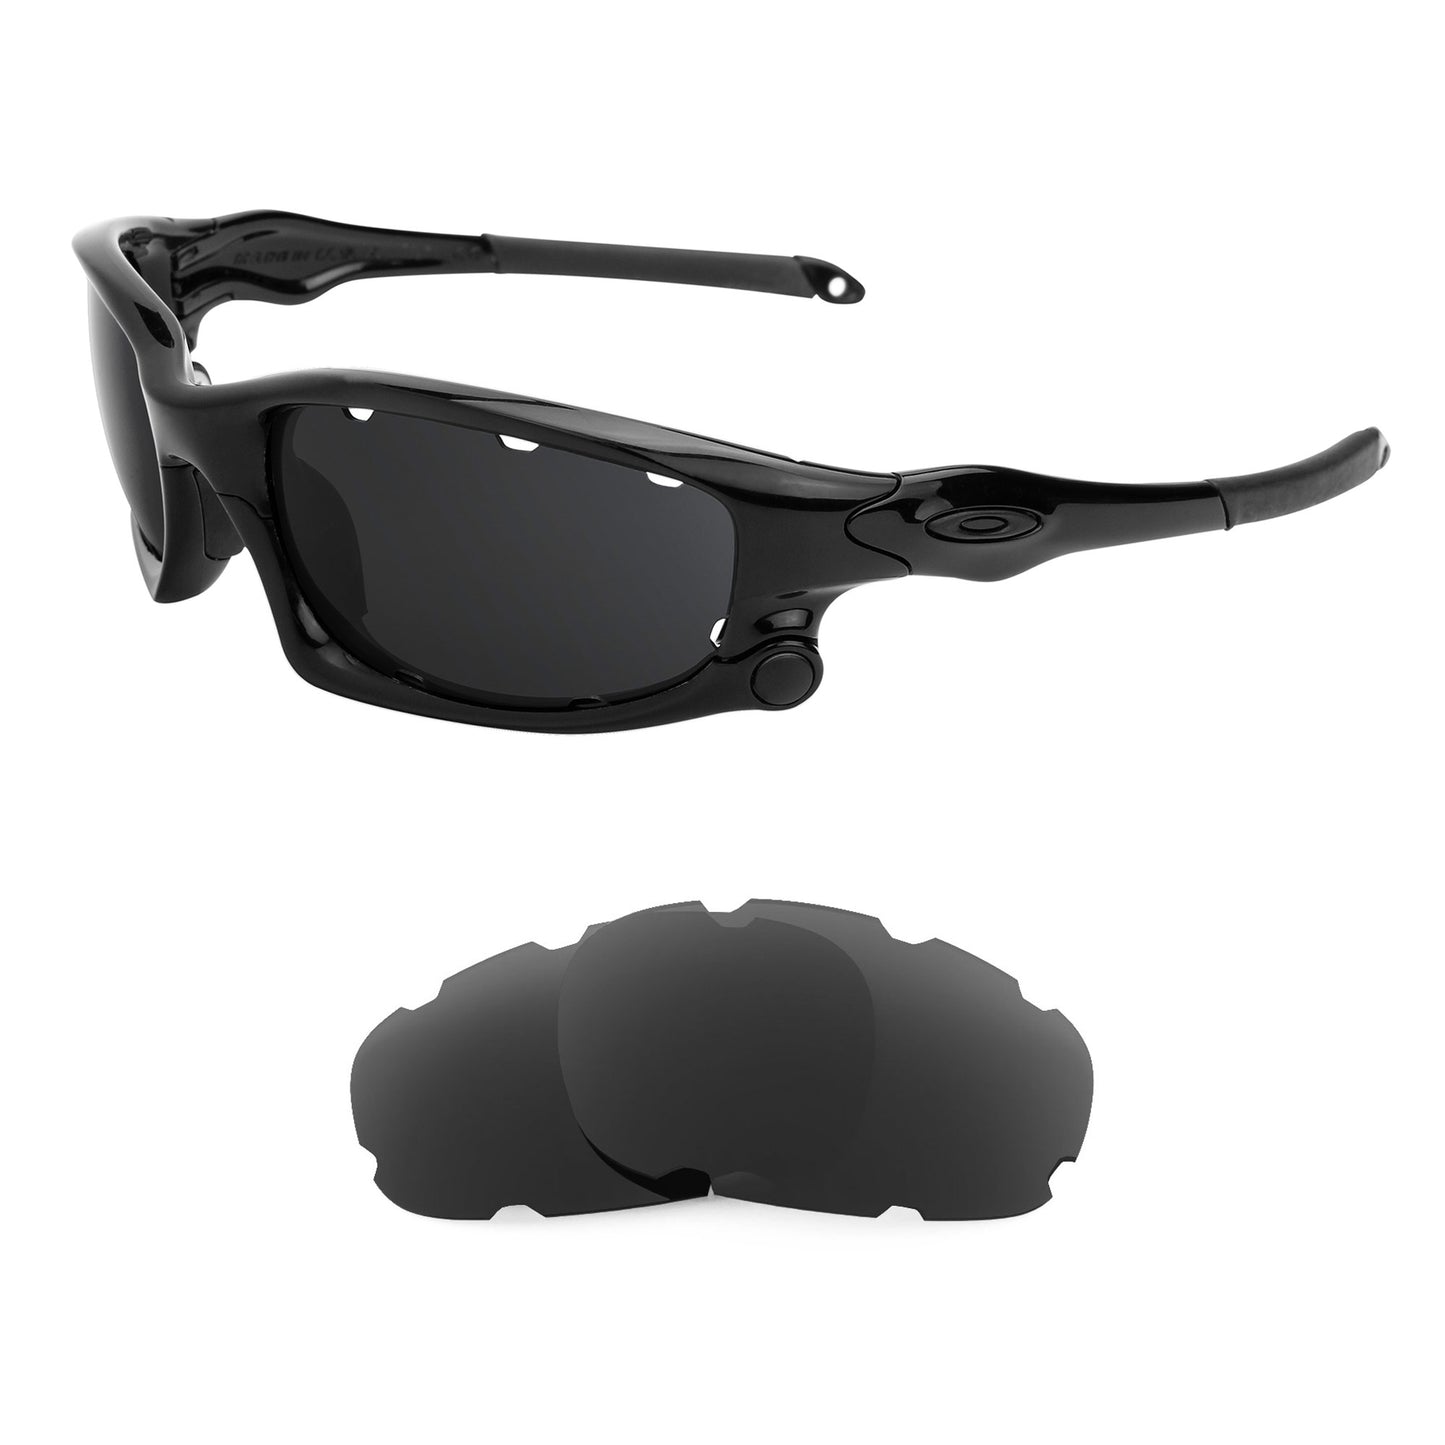 Oakley Wind Jacket Vented sunglasses with replacement lenses